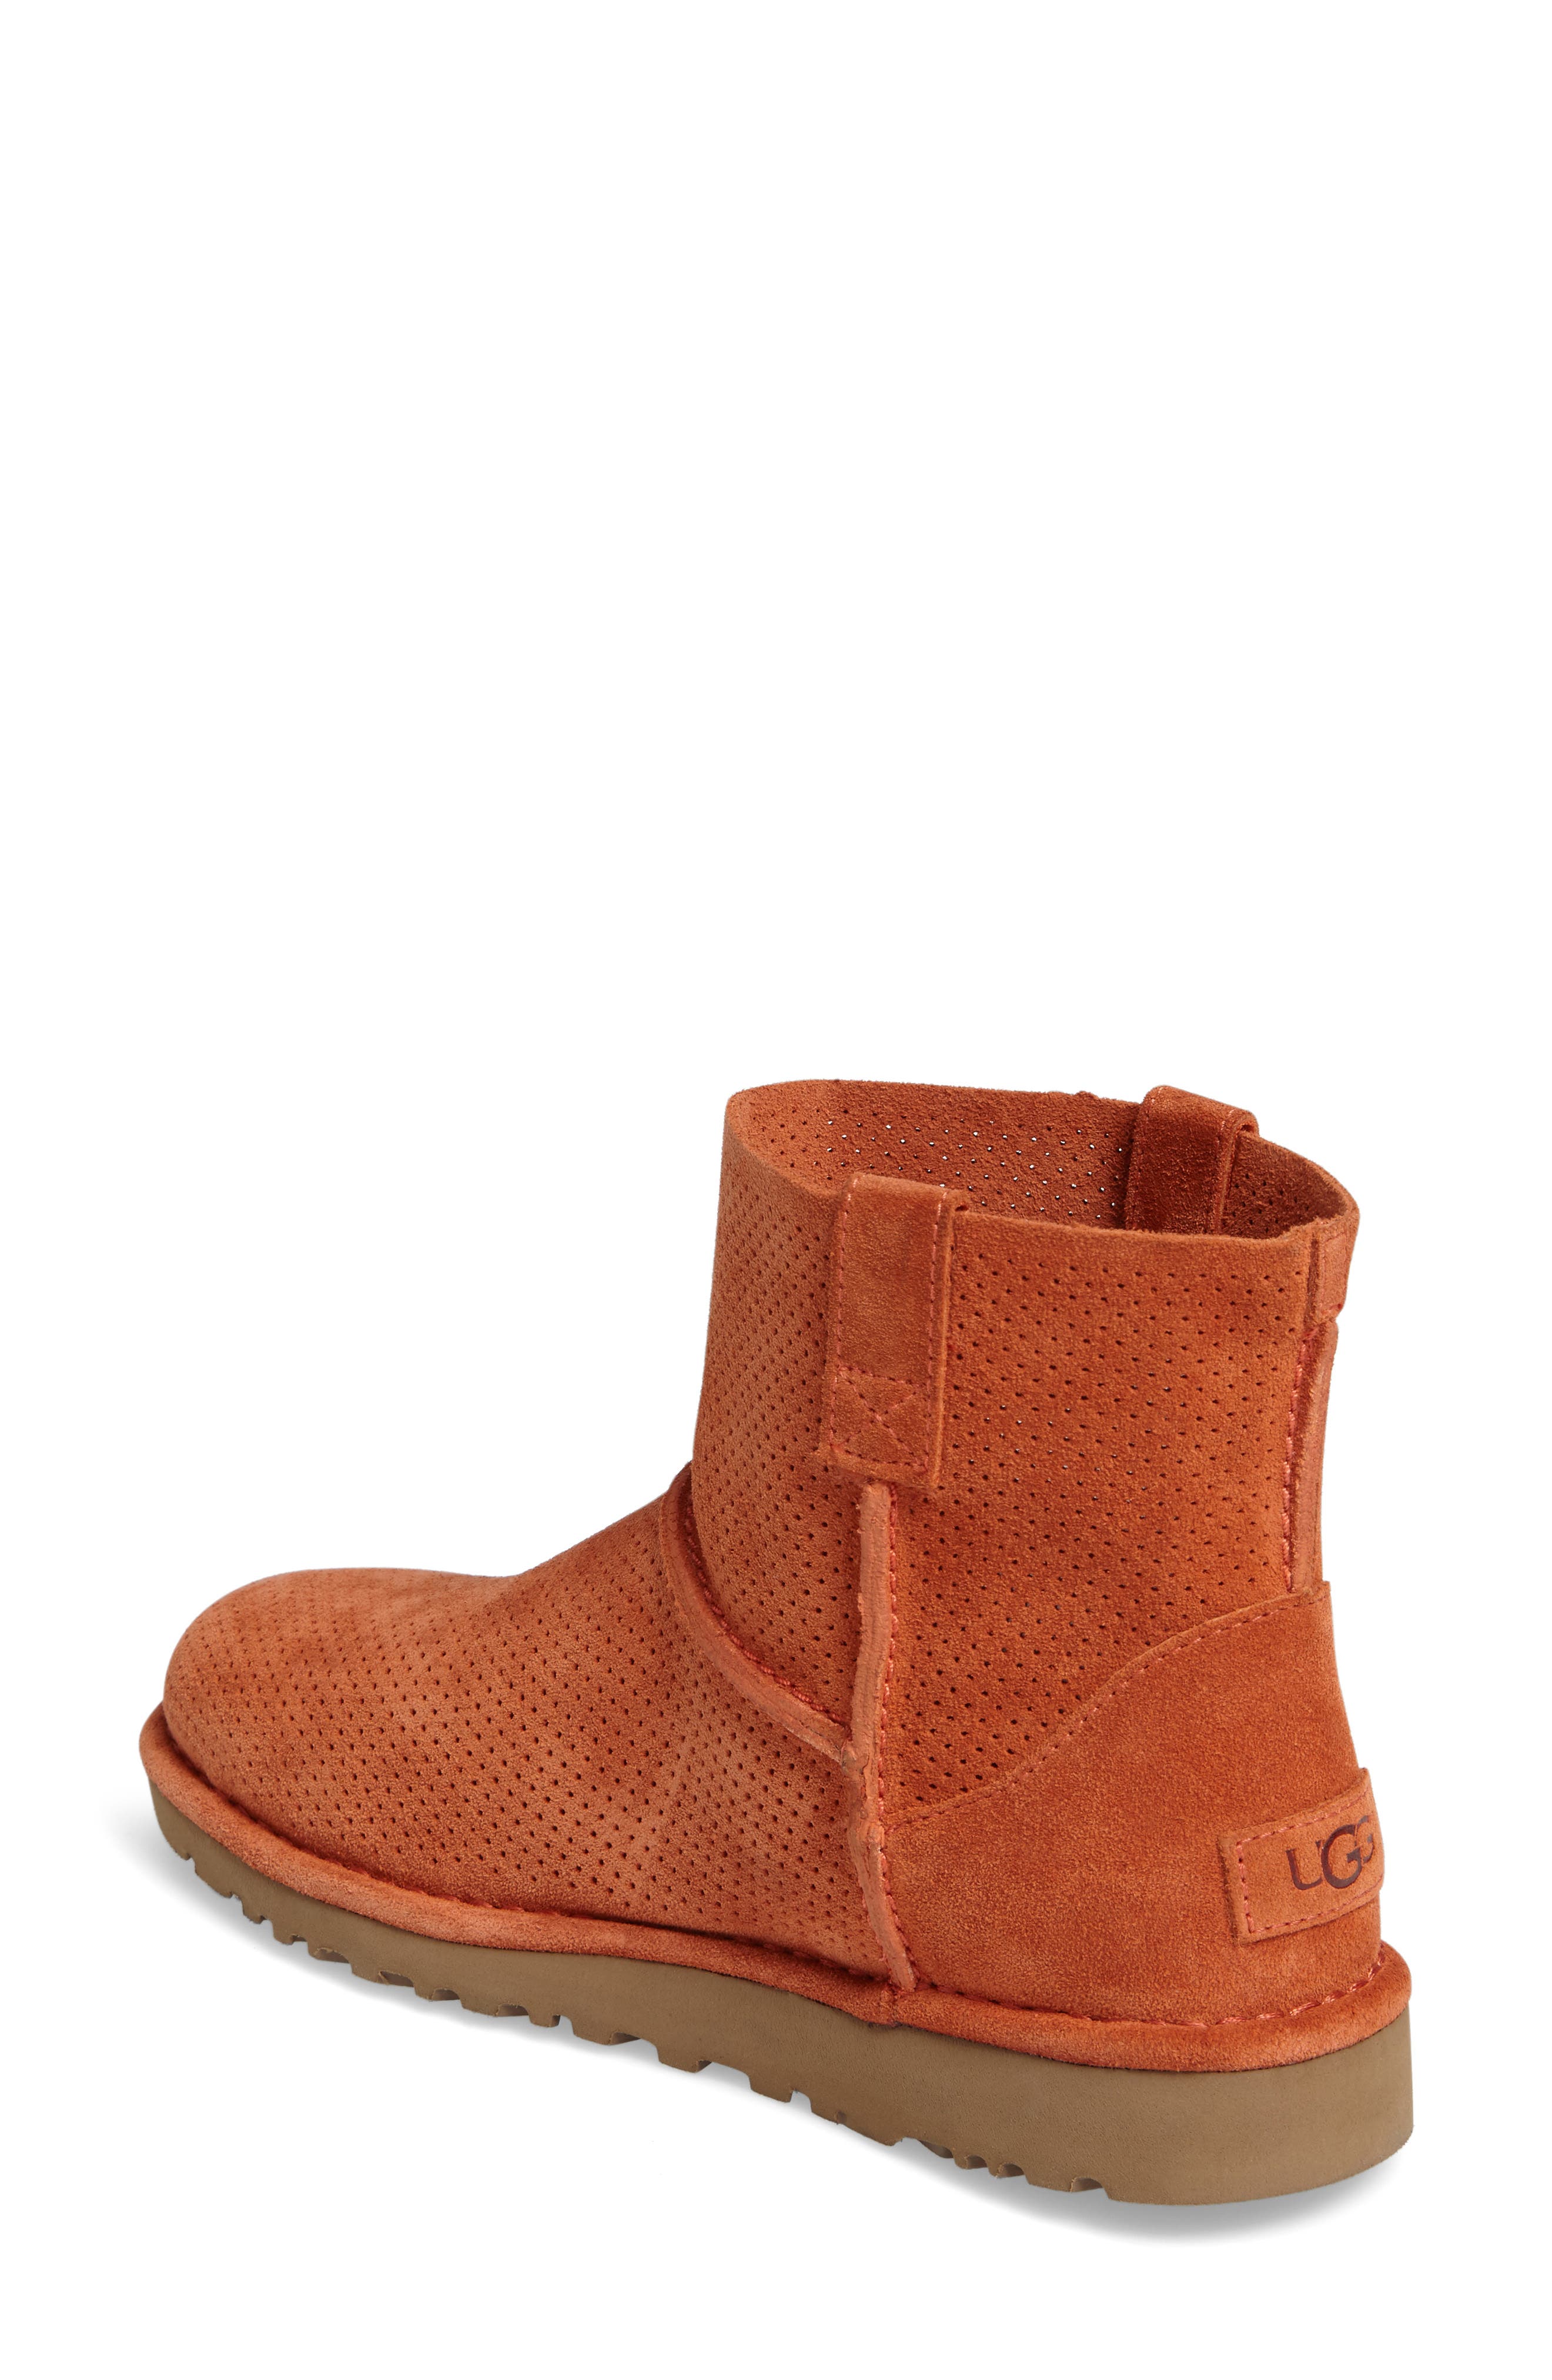 ugg mini perforated boot